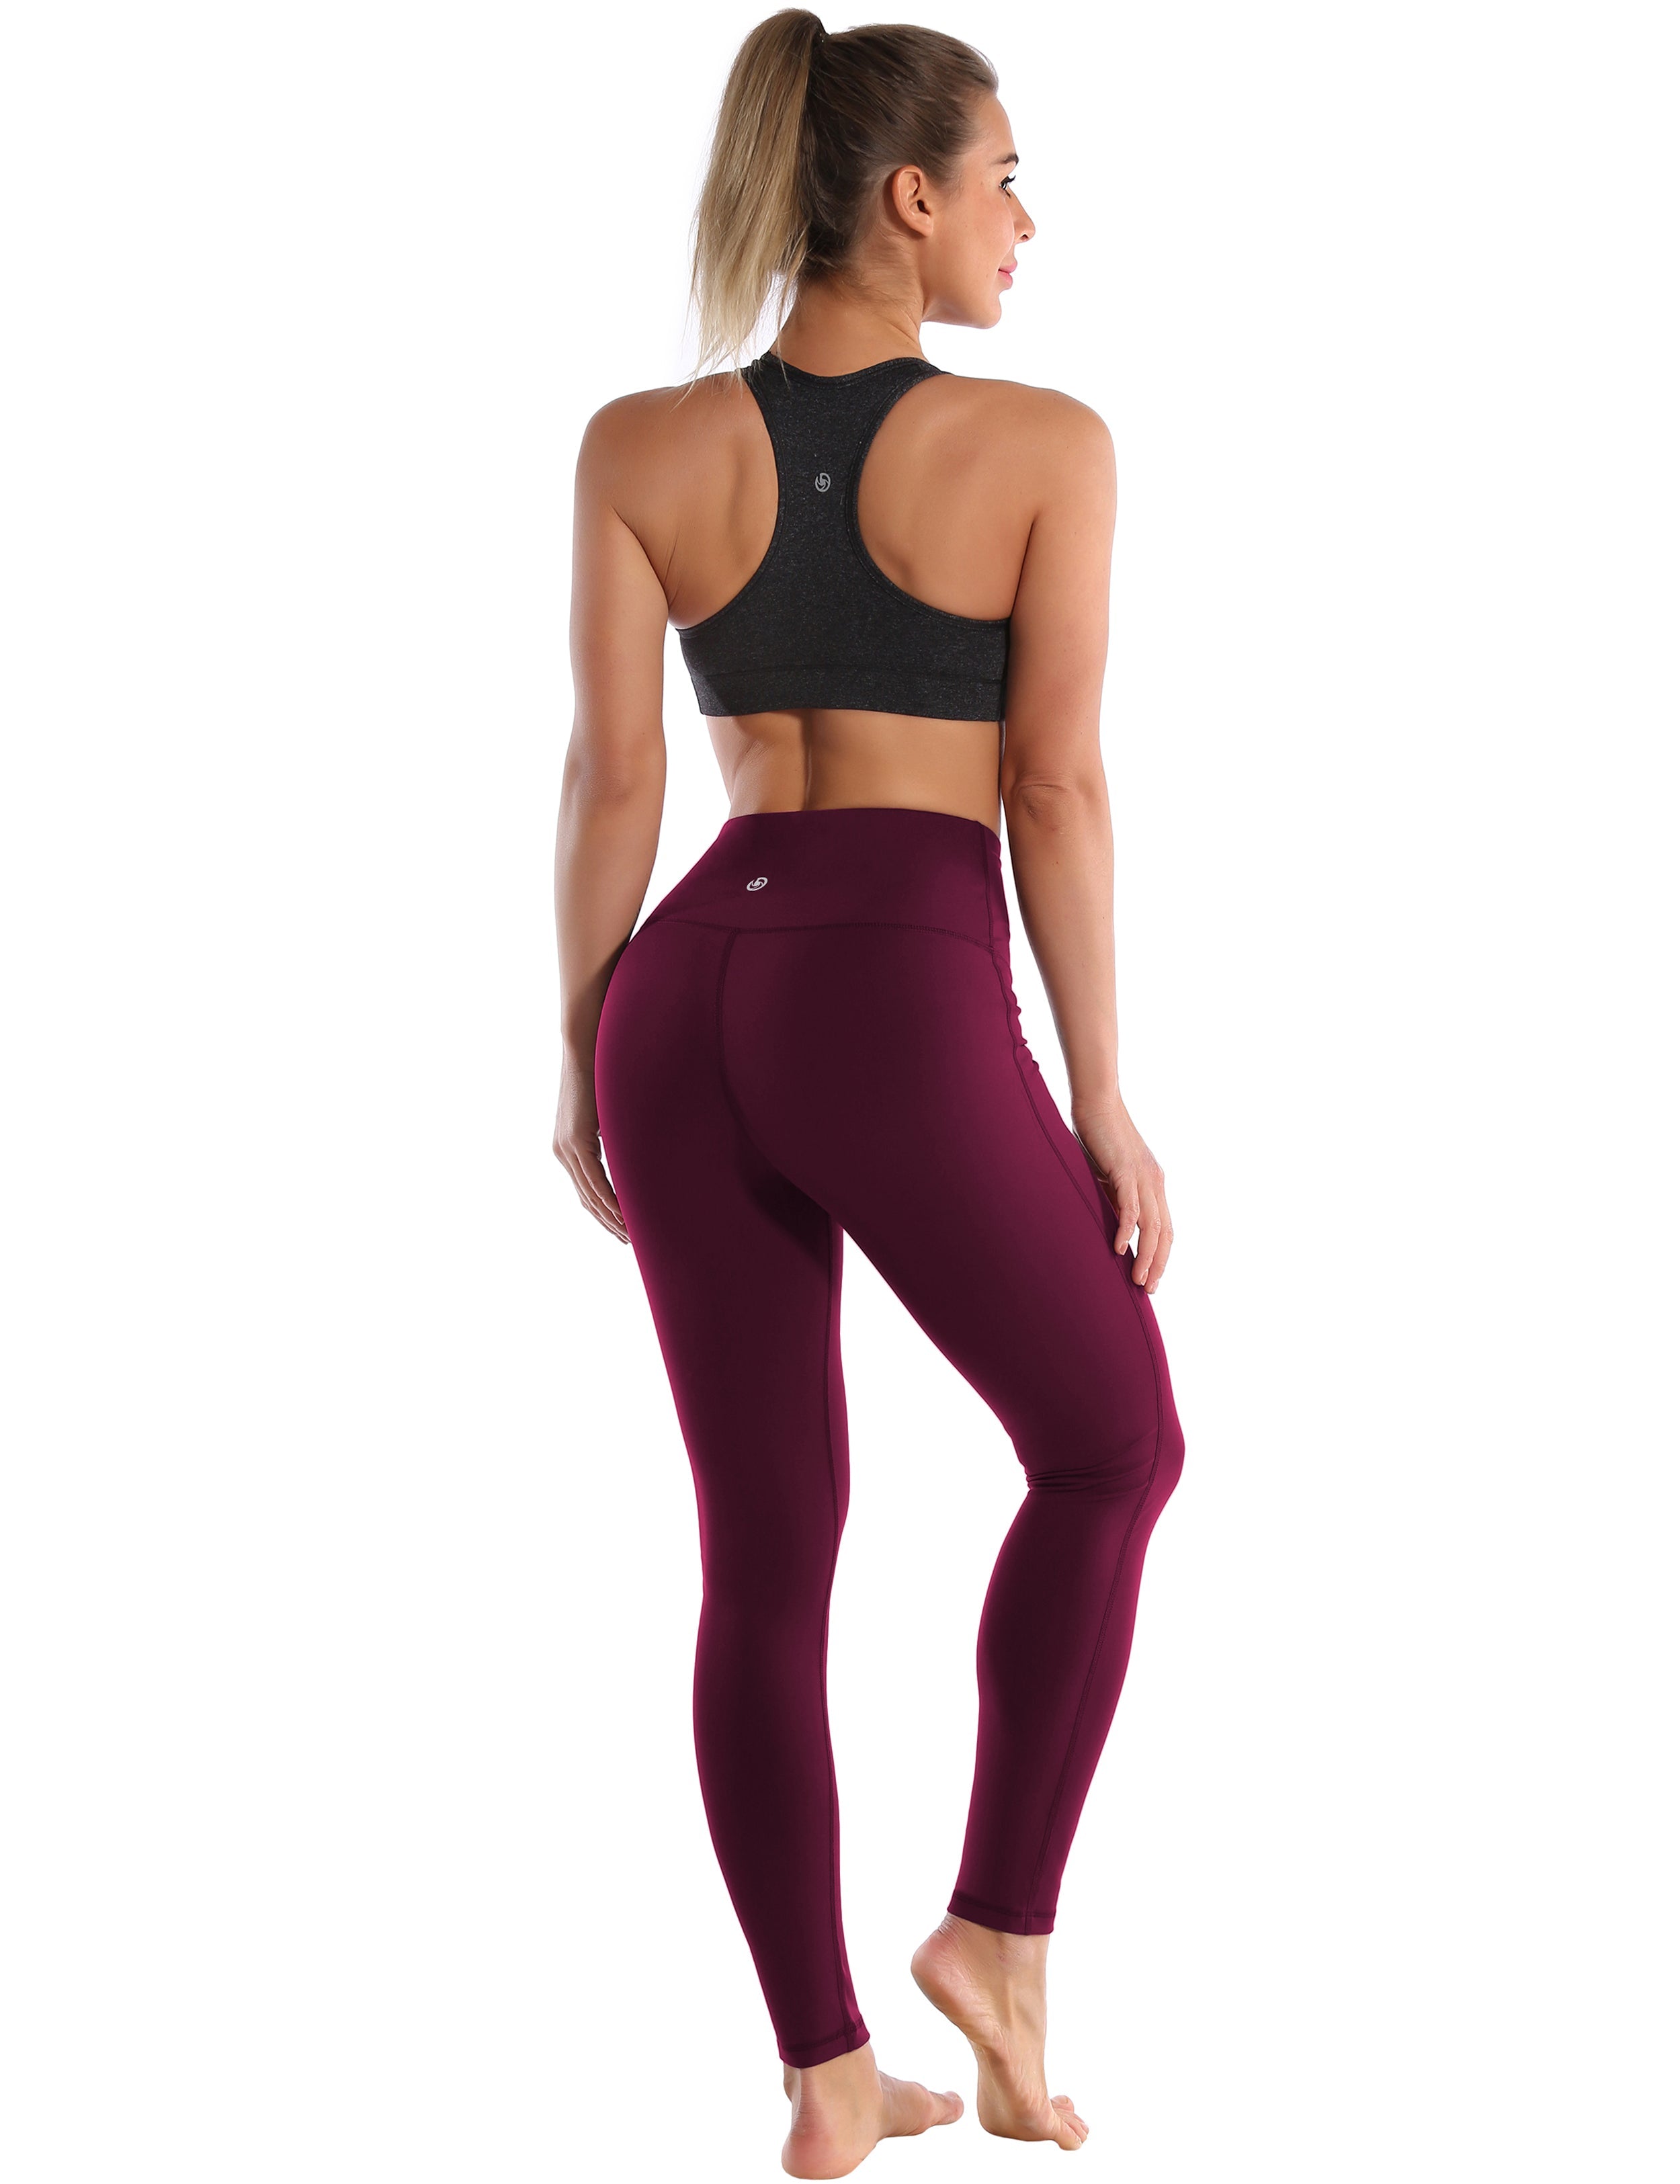 High Waist Side Line Golf Pants grapevine Side Line is Make Your Legs Look Longer and Thinner 75%Nylon/25%Spandex Fabric doesn't attract lint easily 4-way stretch No see-through Moisture-wicking Tummy control Inner pocket Two lengths